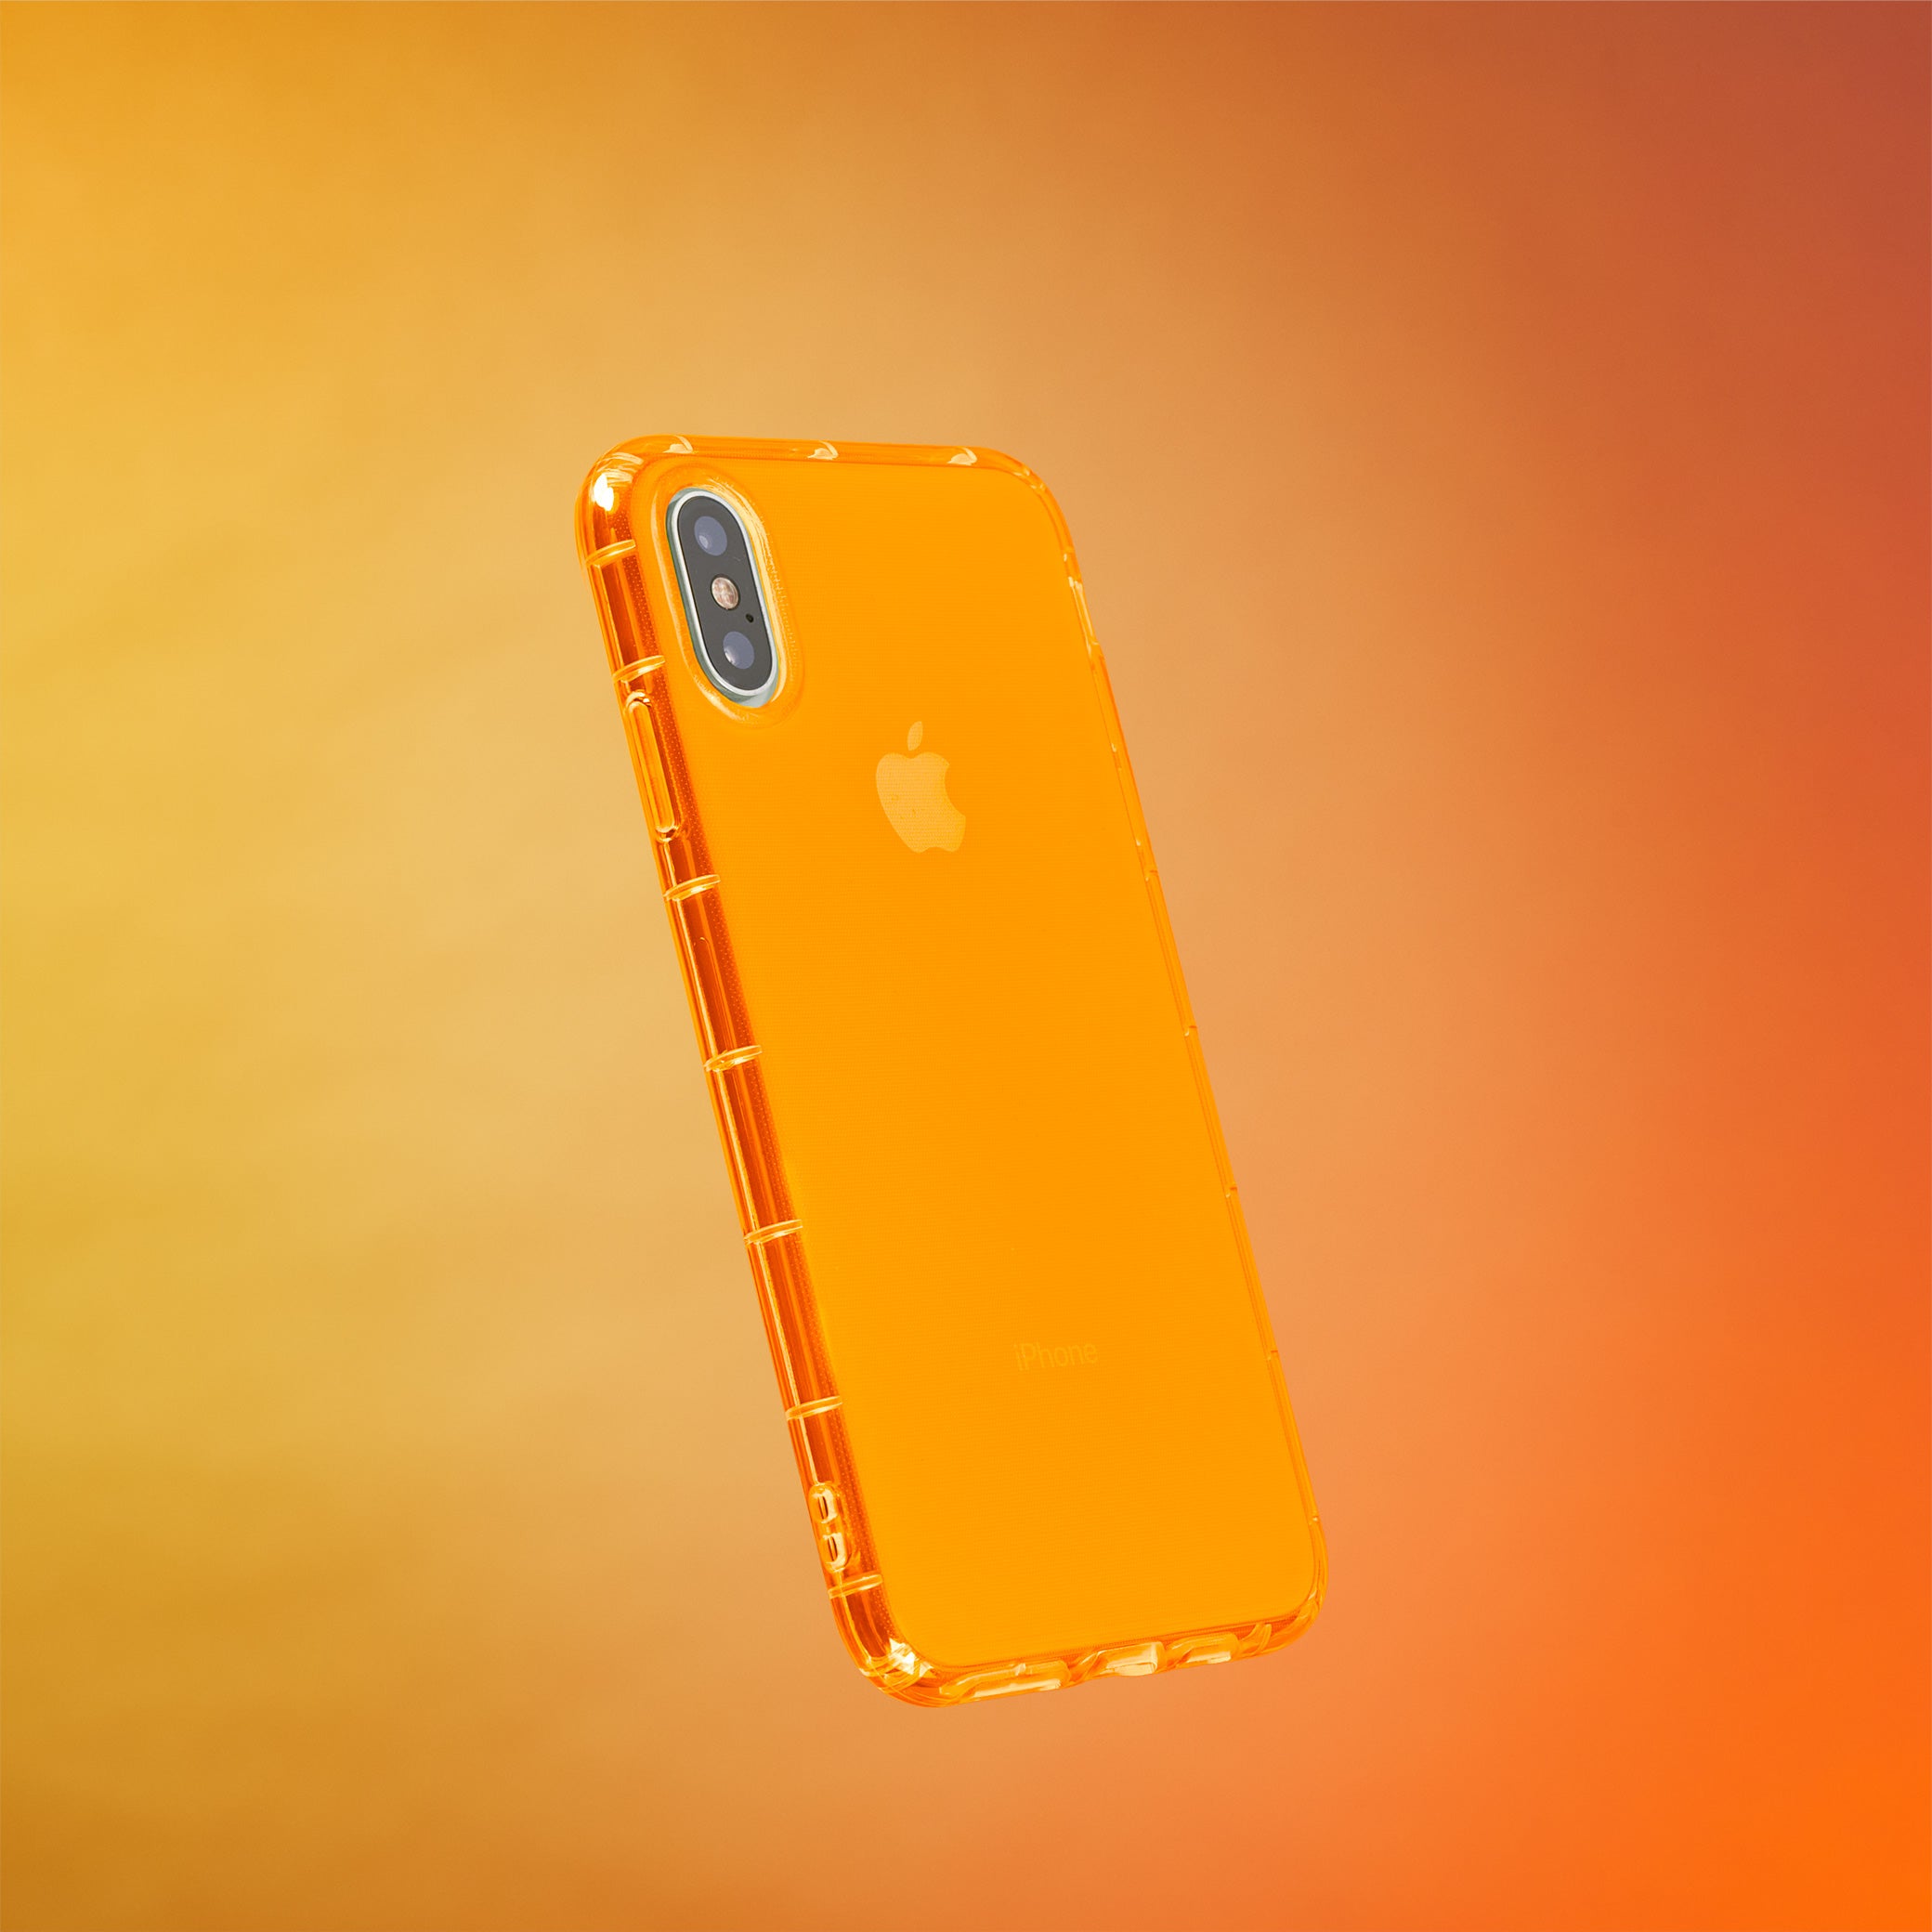 Highlighter Case for iPhone Xs & iPhone X - Intense Bright Orange